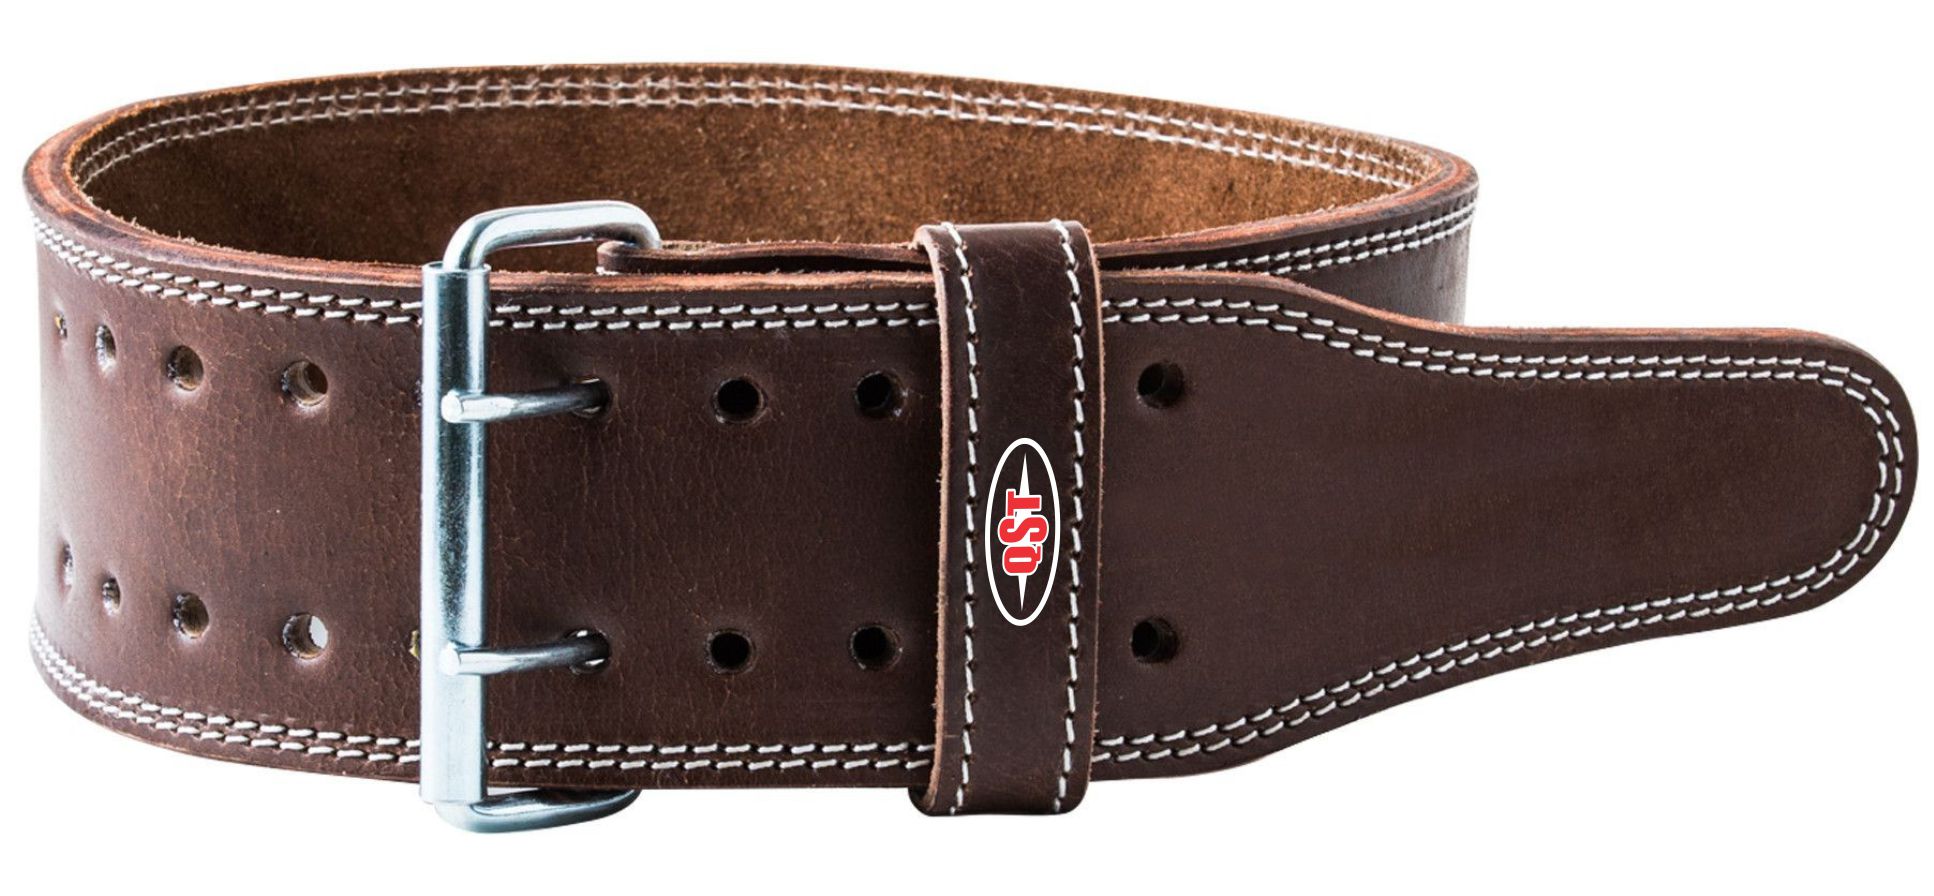 Leather Weightlifting Belt - ACS-1229